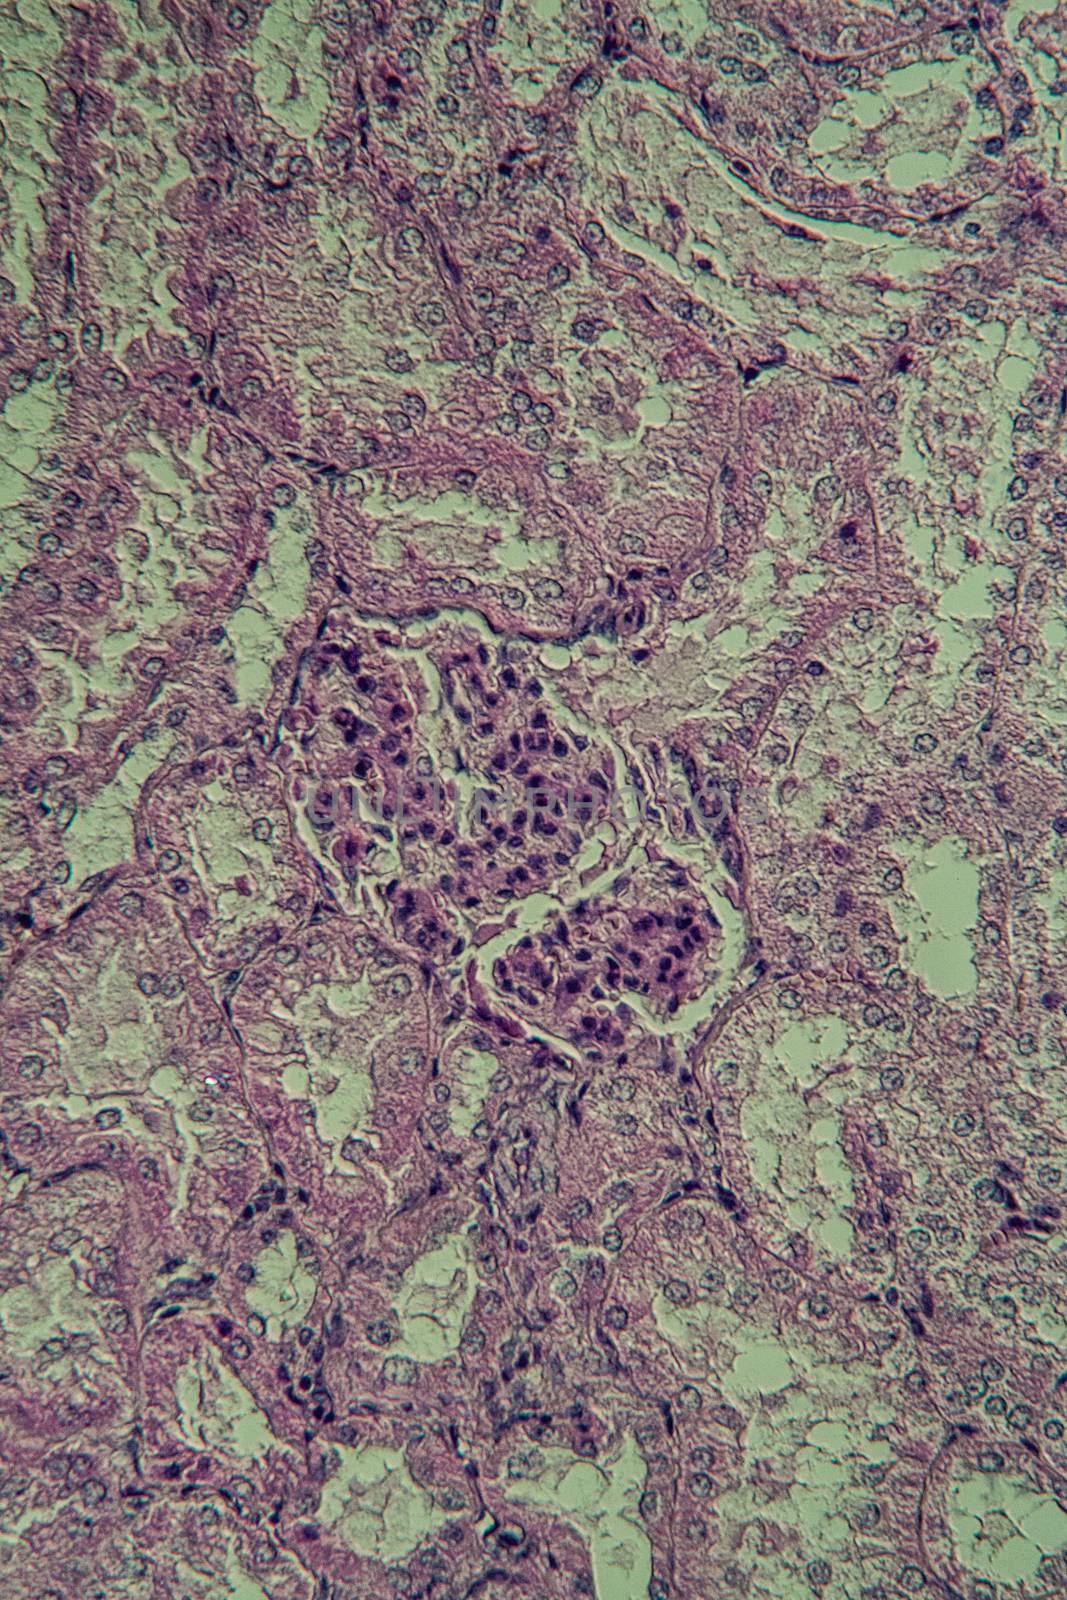 Cross section of the kidney with Glumeroli 200x by Dr-Lange